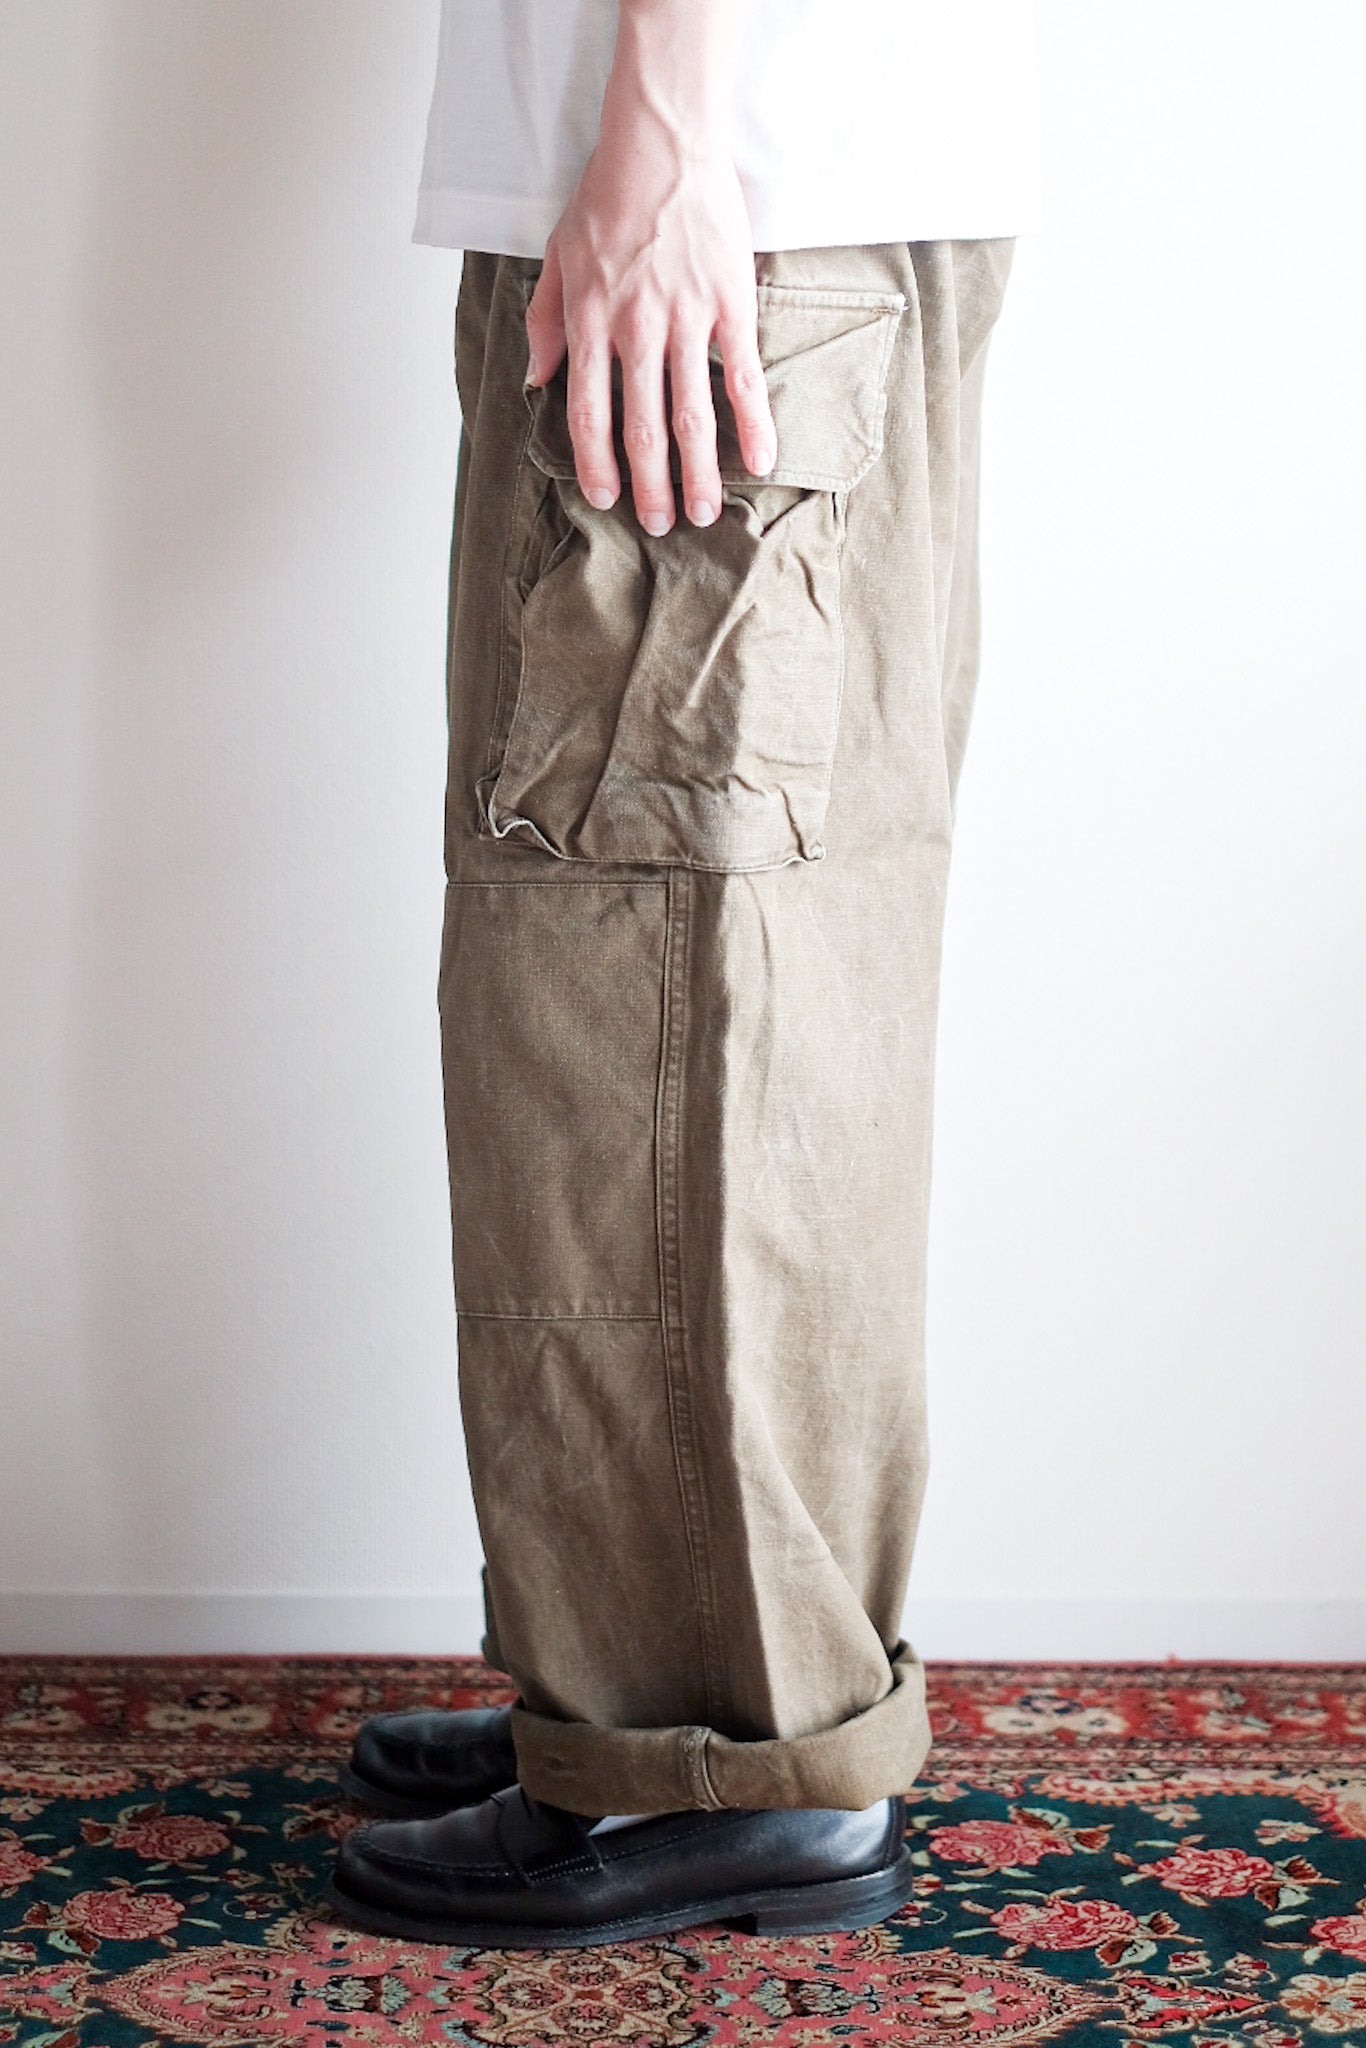 [~ 50's] French Army M47 Field Trousers